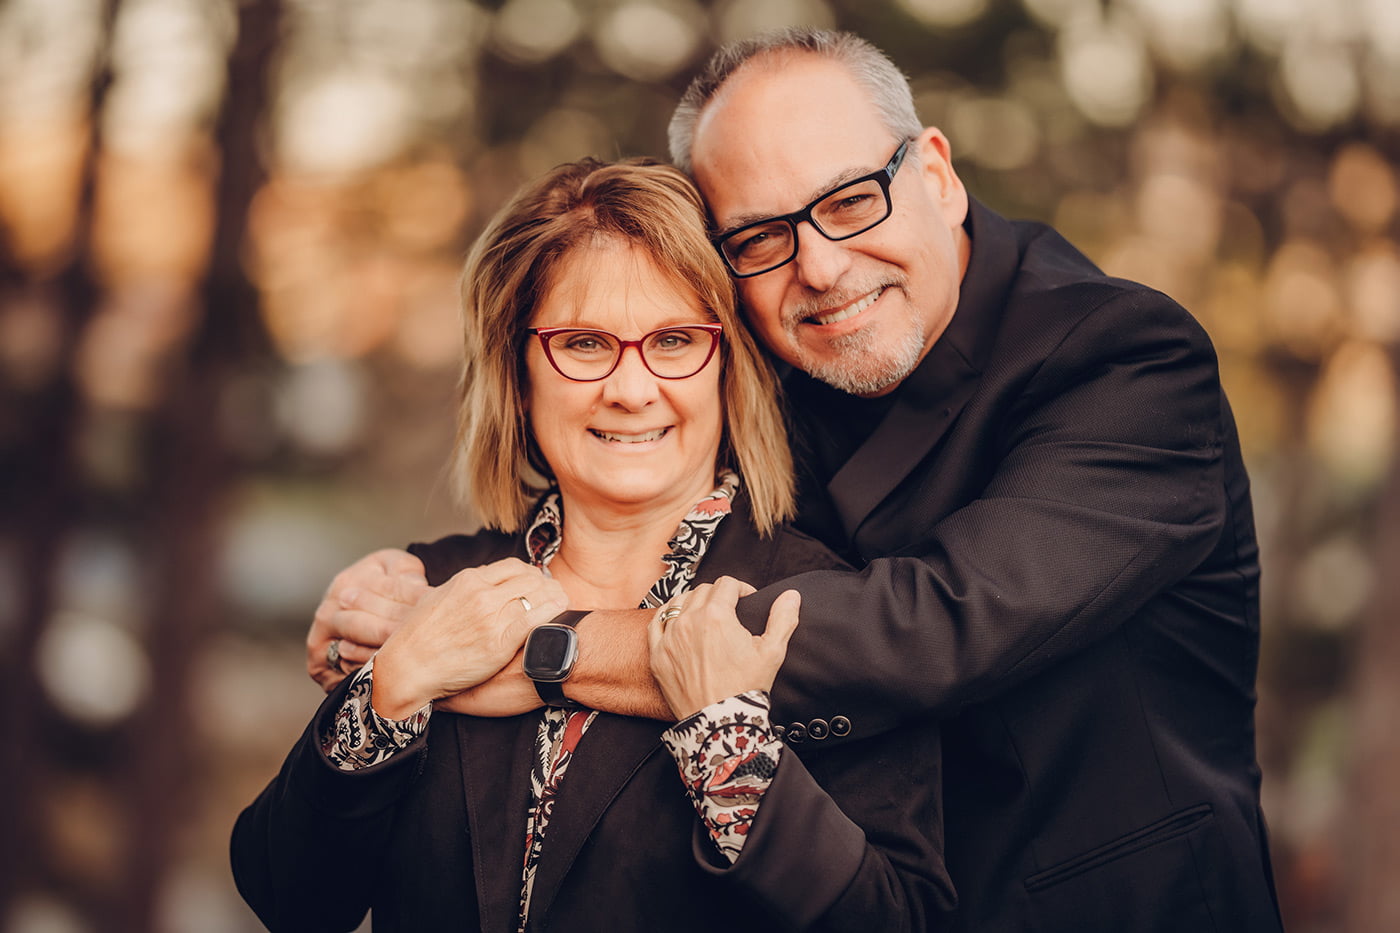 Getting to Know You: Pat and Brenda Mahar, ICF Padova, Italy